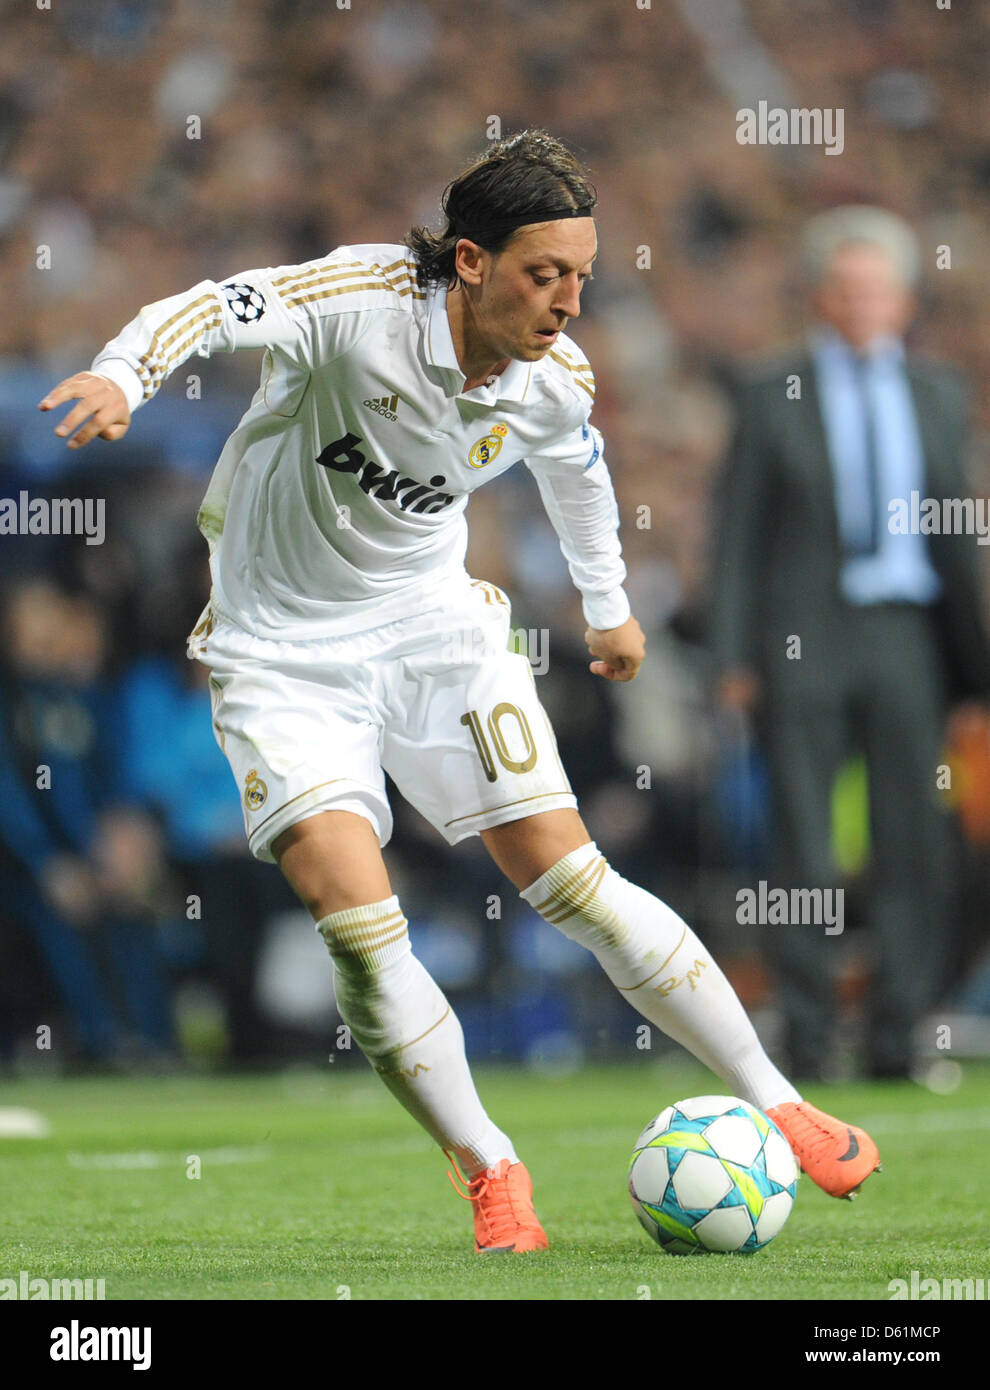 Madrid's Mesut Ozil plays the ball during the Champions League semi final second leg soccer match between Real Madrid and FC Bayern Munich at the Santiago Bernabeu stadium in Madrid, Spain, 25 April 2012. Bayern won in the penalty shoot out. Photo: Andreas Gebert Stock Photo